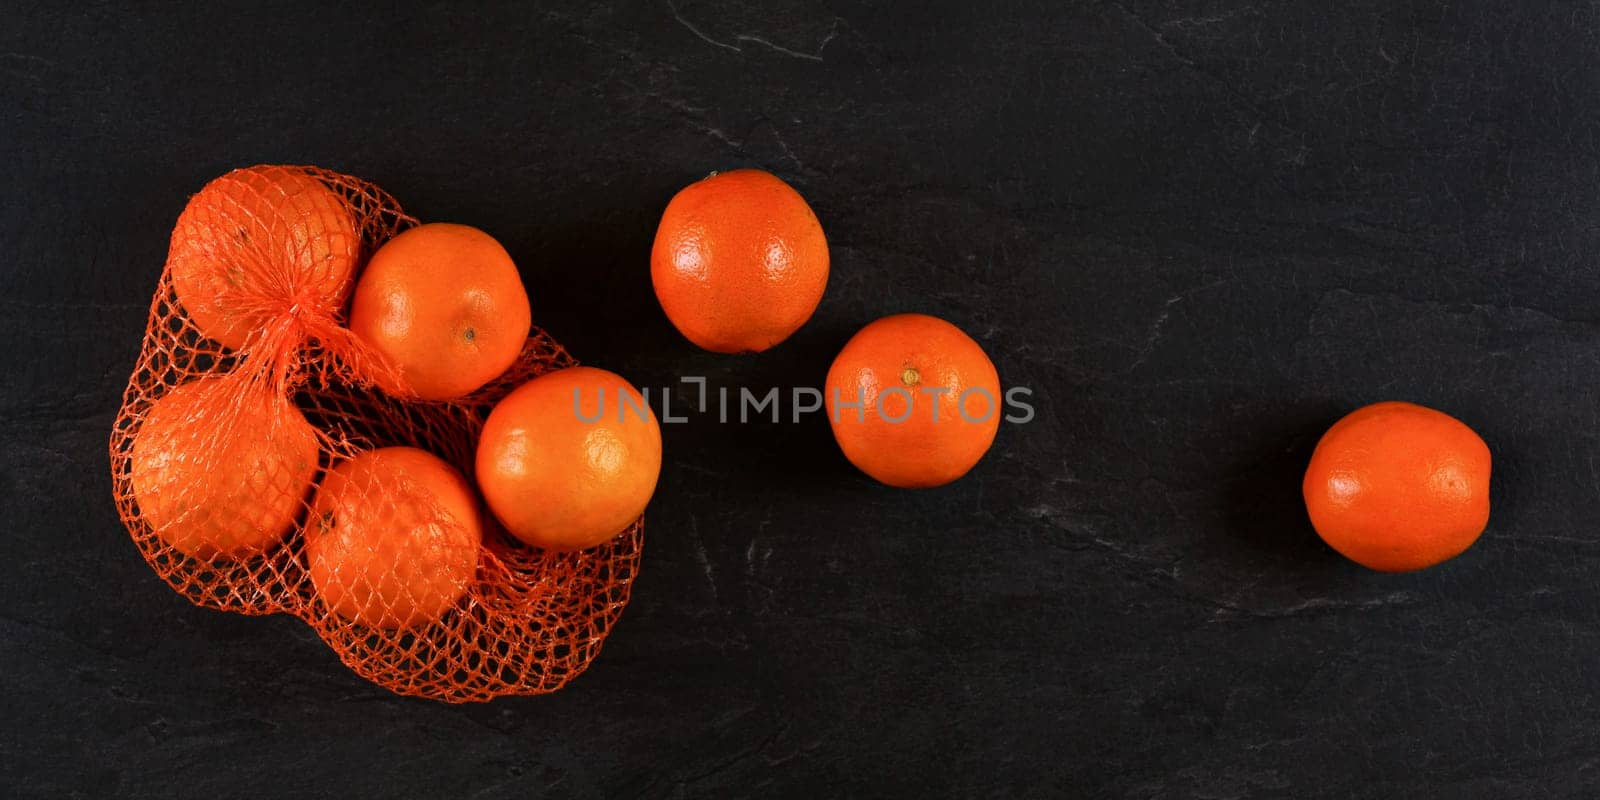 Oranges in plastic red net from supermarket, some scattered on black stone like board, photo from above by Ivanko